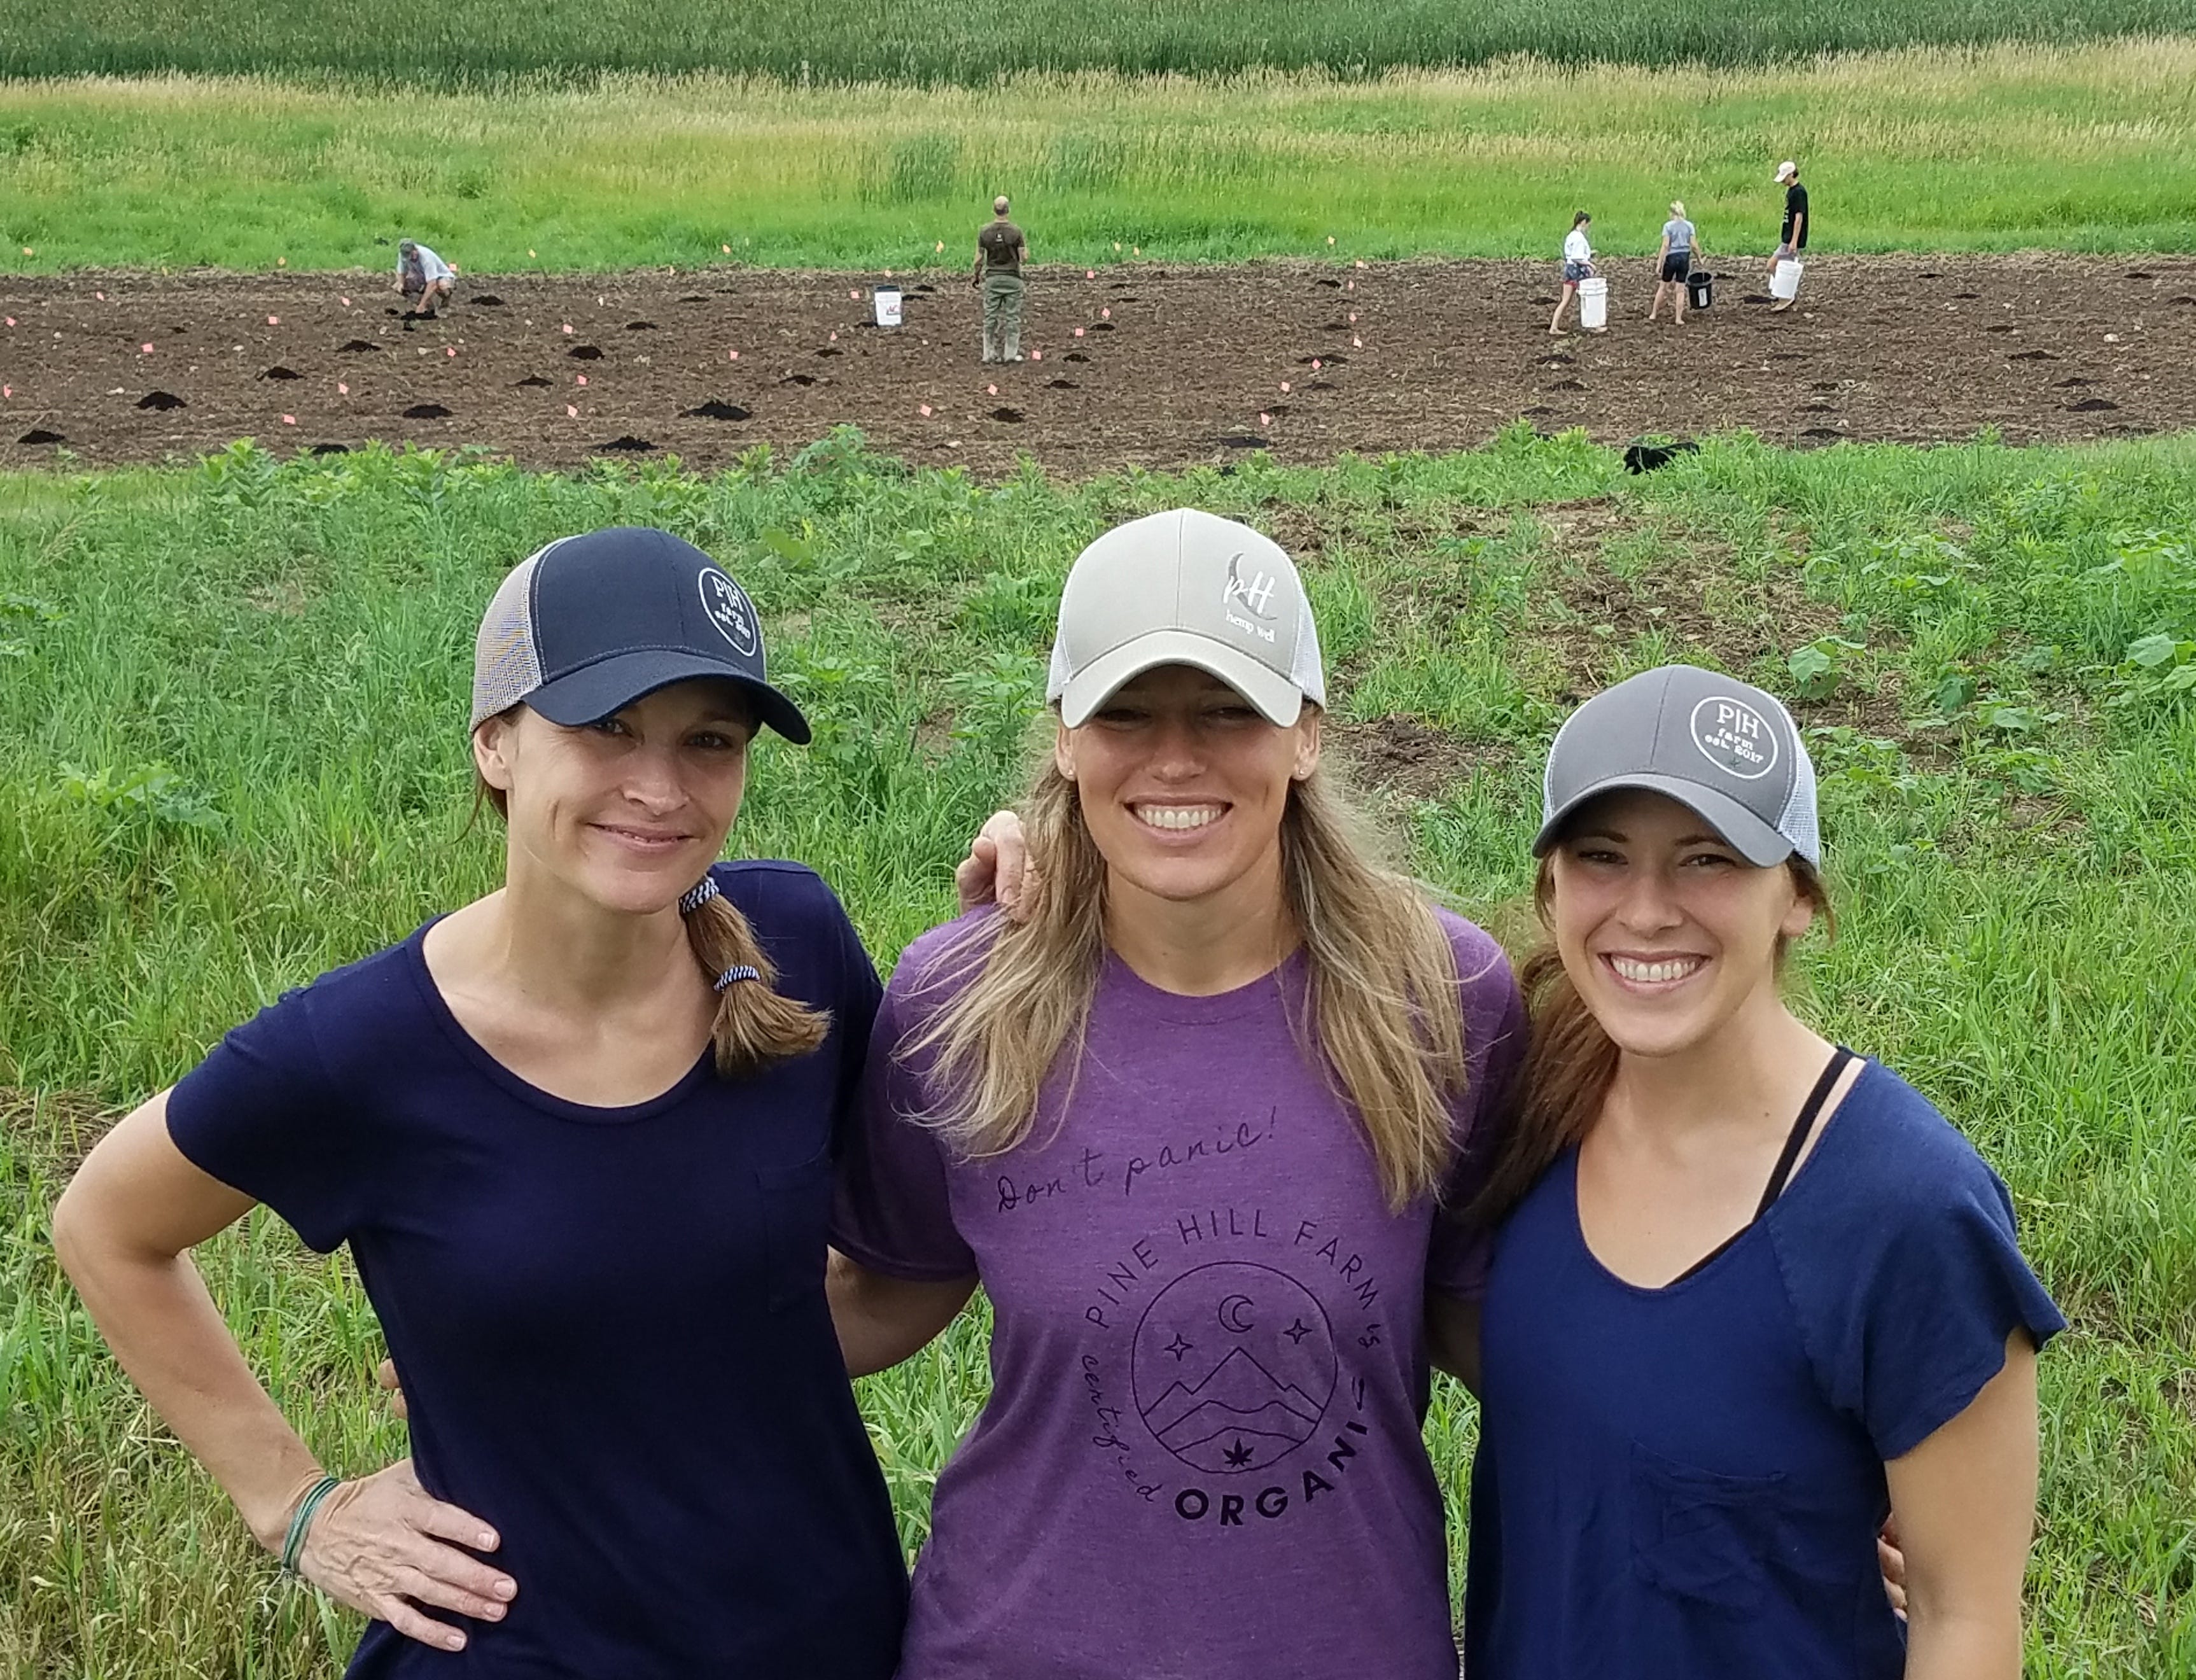 Sisters, from left, Jackie, Leanne and Lynley raise and market hemp at the Watertown area farm where they grew up.  Behind them their children assist with the planting process.  They also help weed the fields and pick the stones.